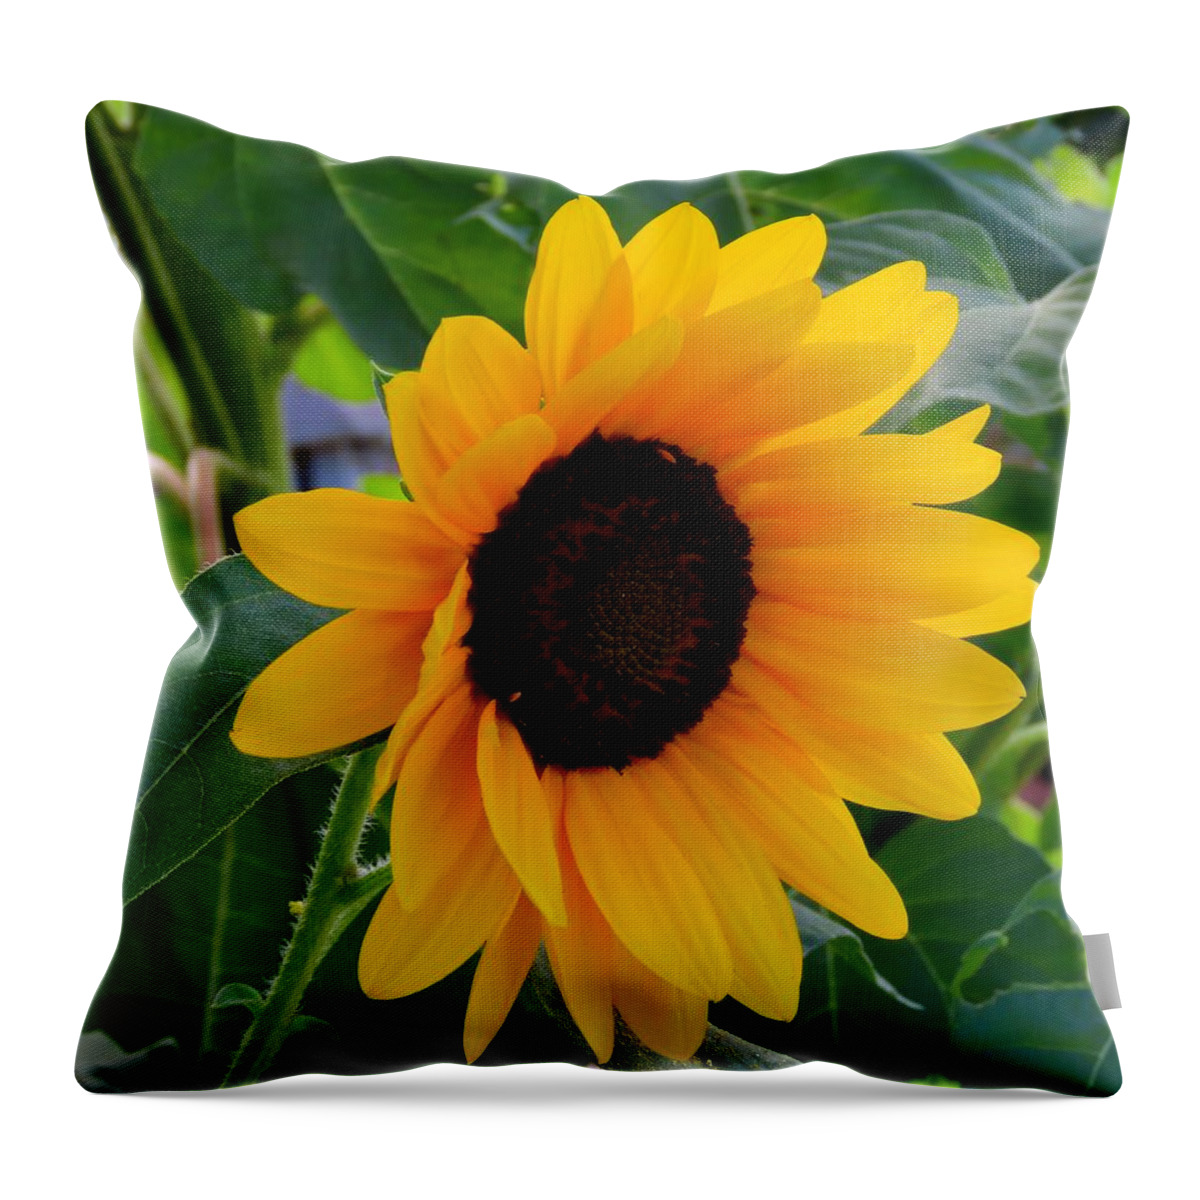 Flowers Throw Pillow featuring the photograph Sunflower - Two by Linda Stern